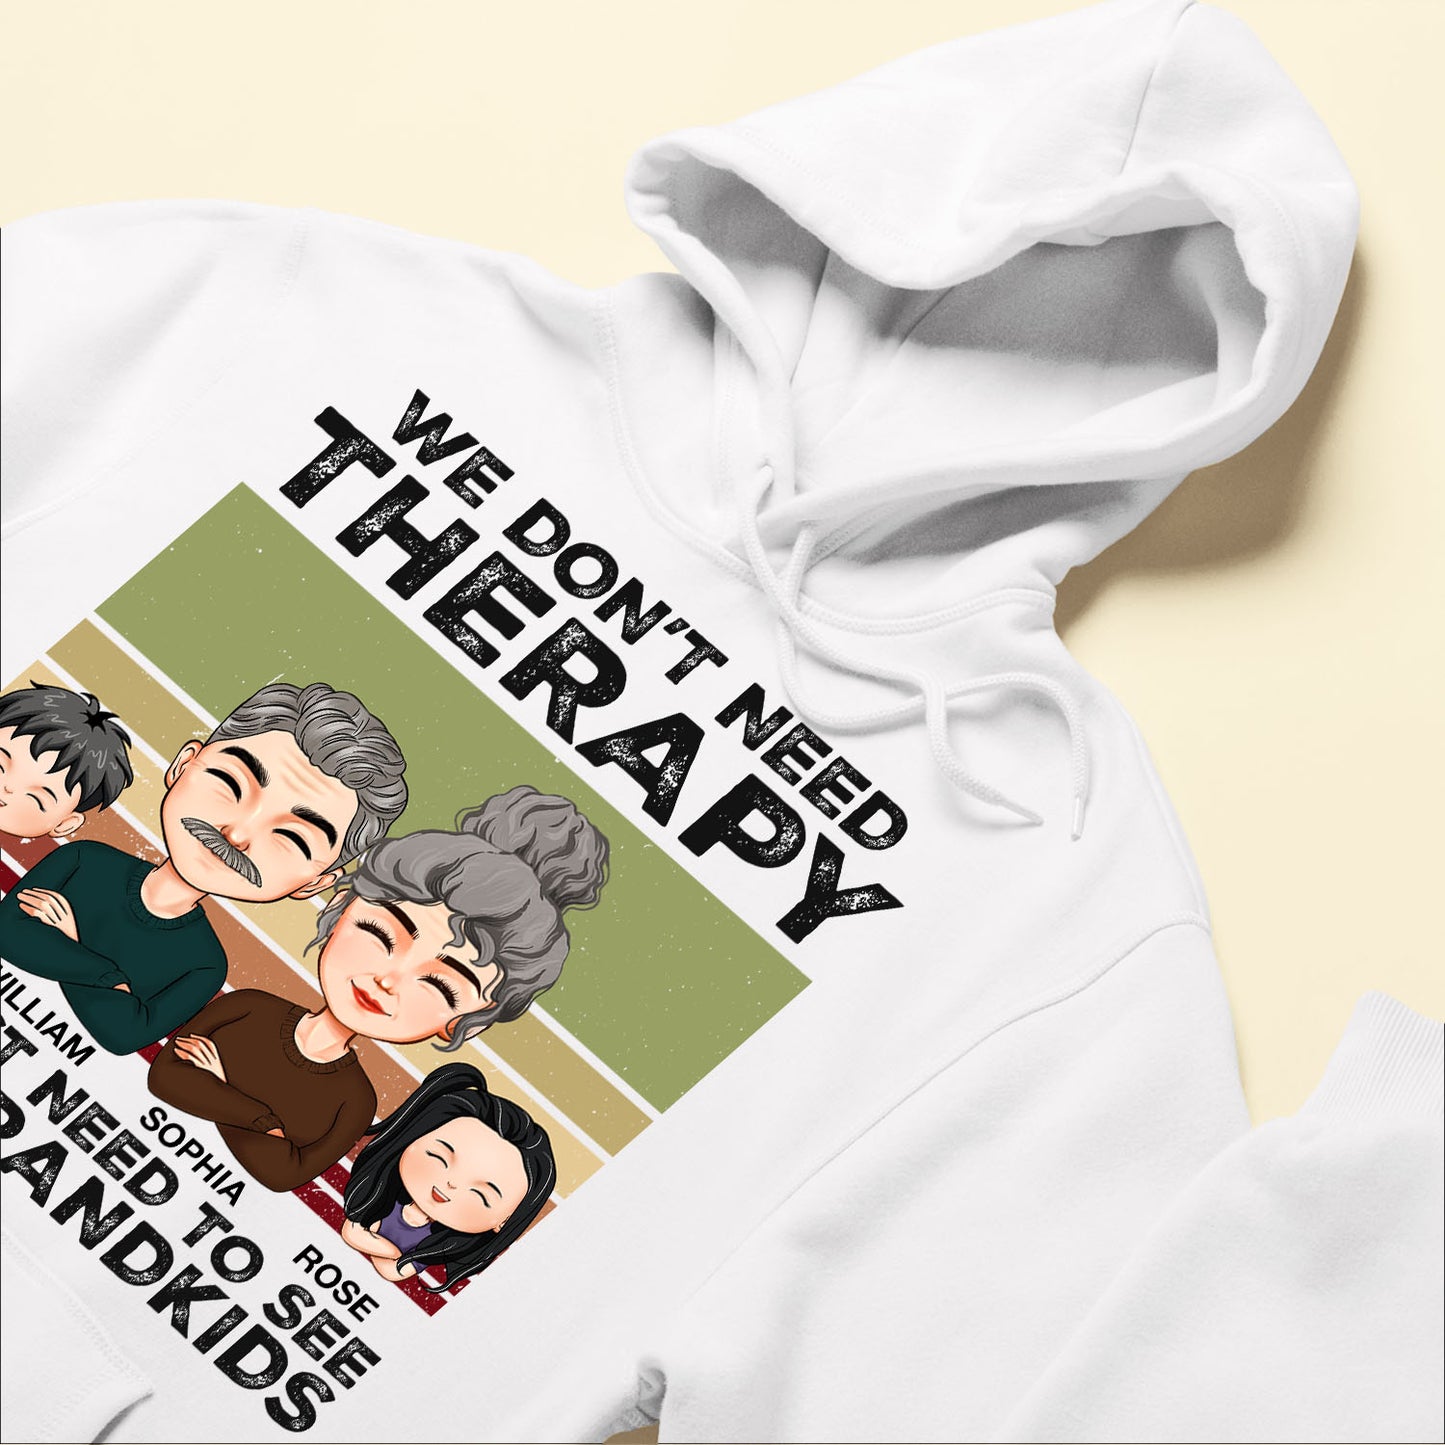 I Don't Need Therapy I Just Need To See My Grandkids - Personalized Shirt